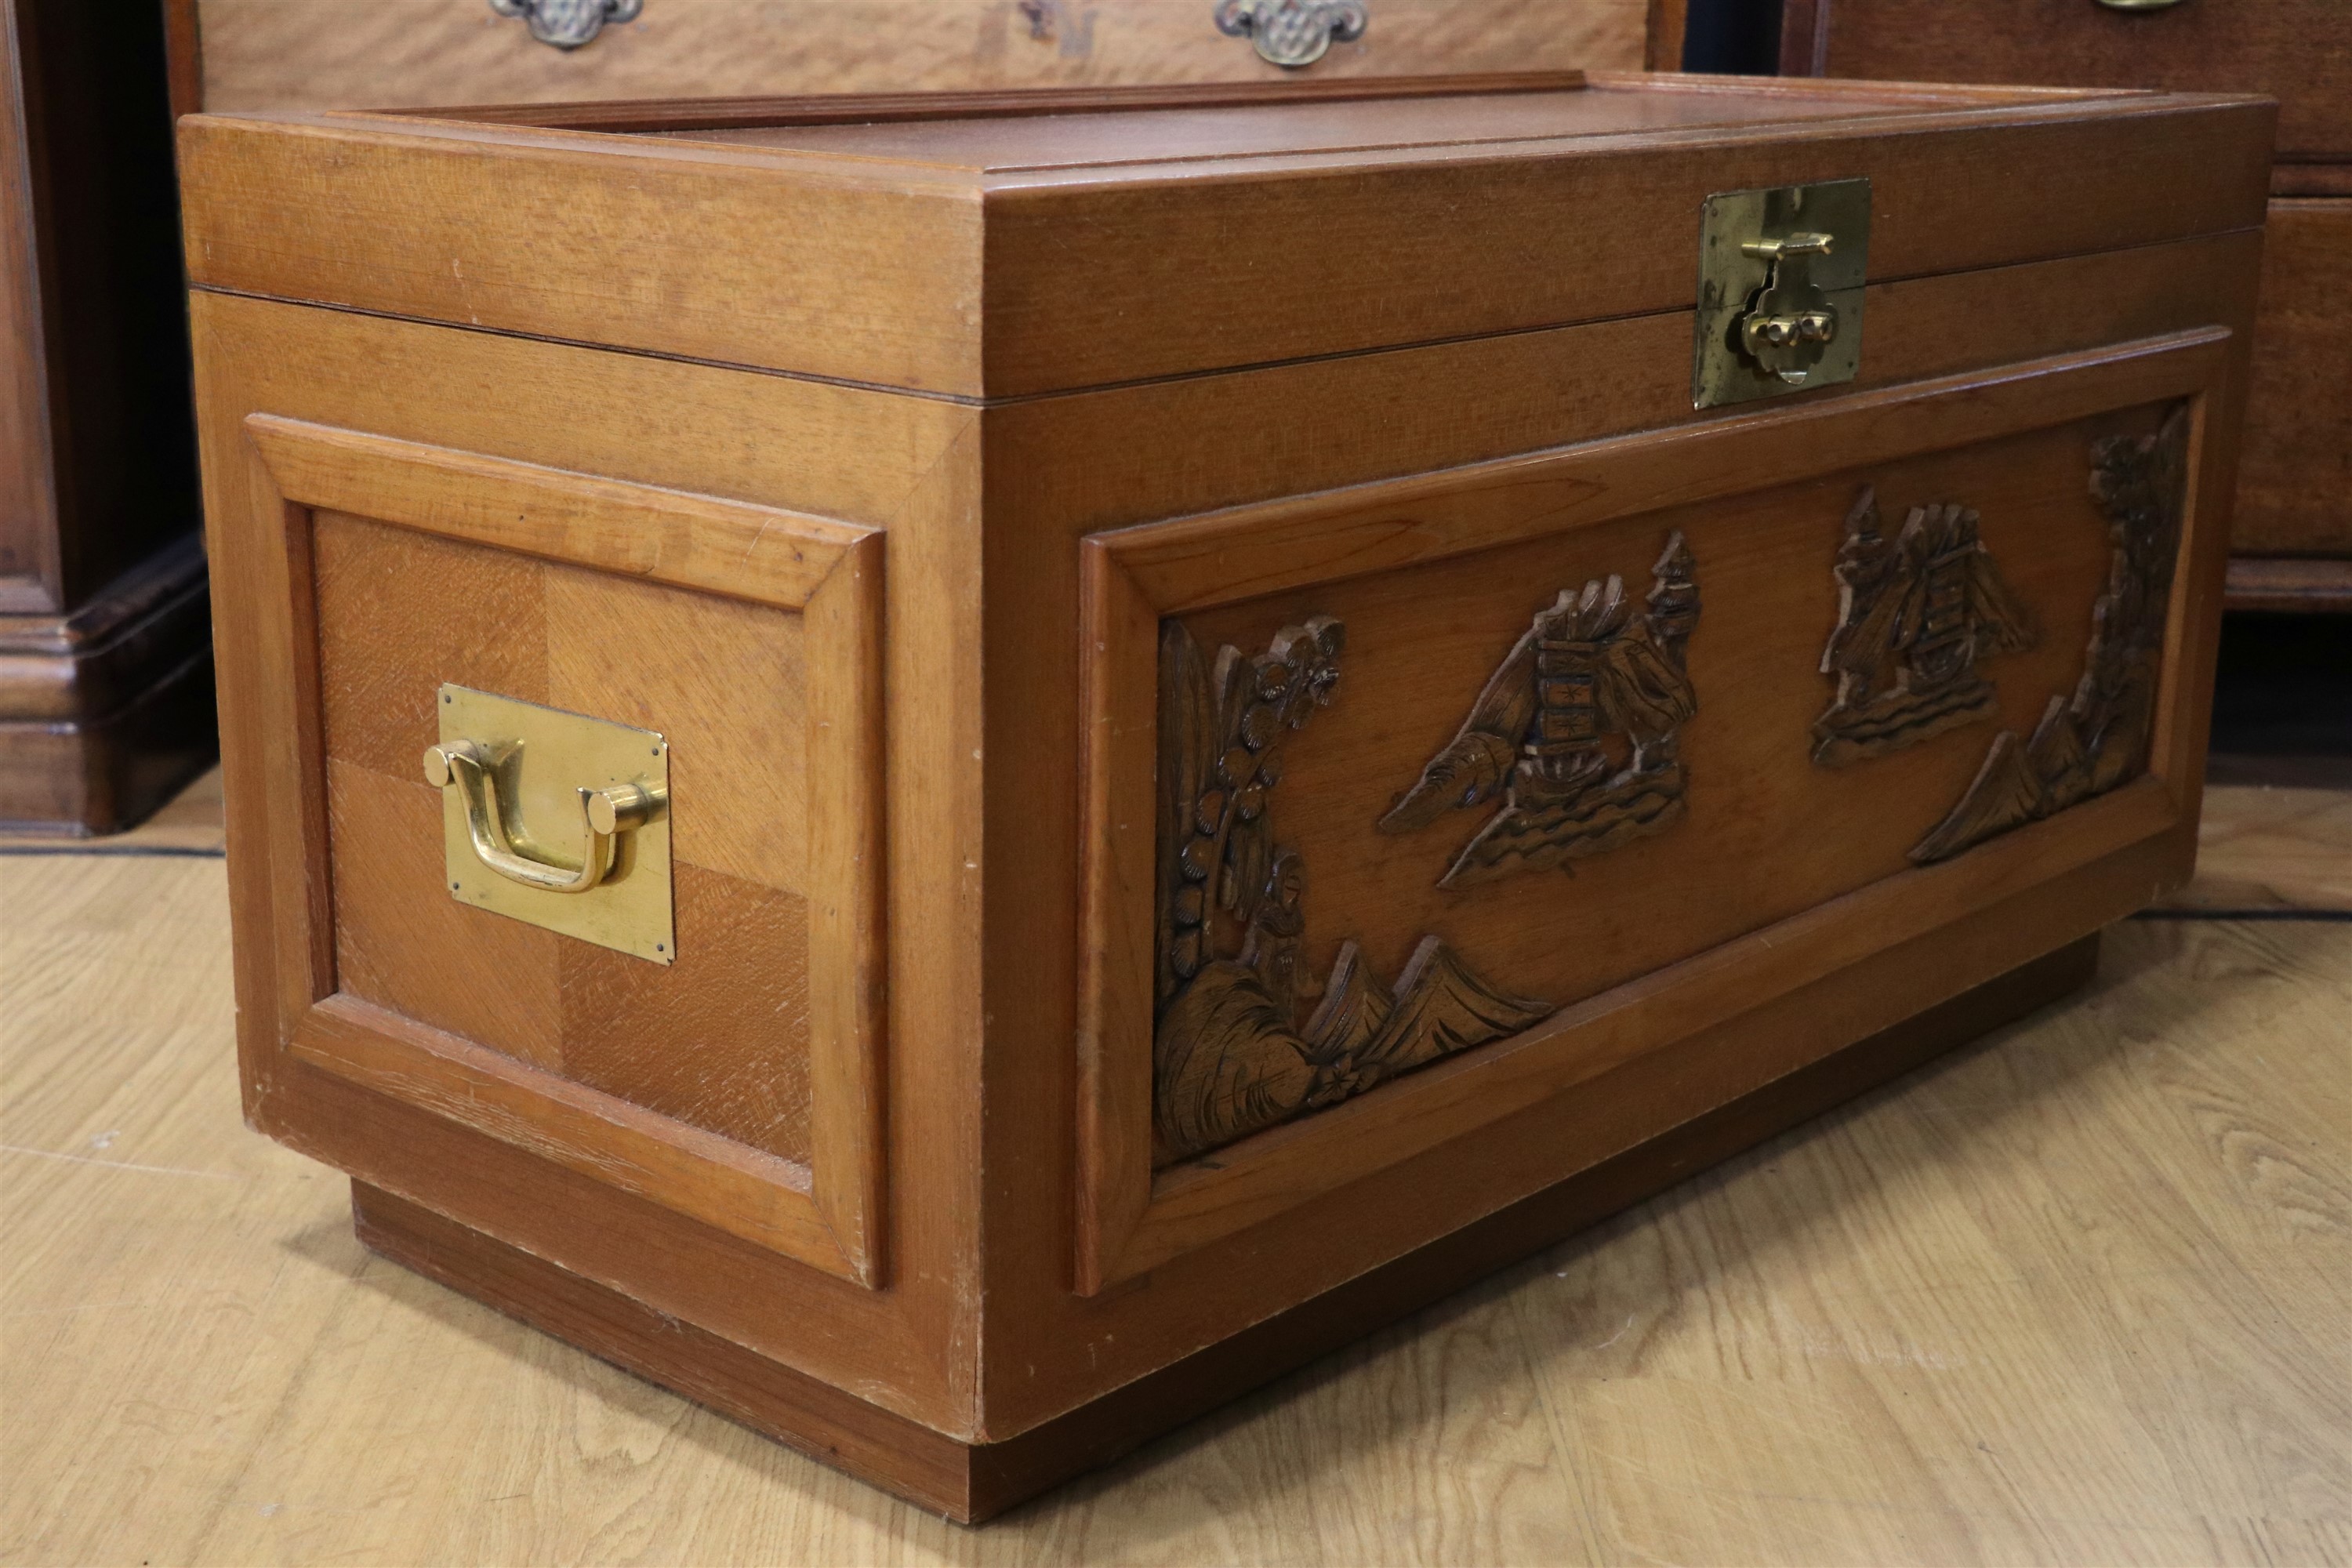 A pair of carved Oriental camphor chests, late 20th century, 92 x 44 x 47 cm - Image 4 of 4